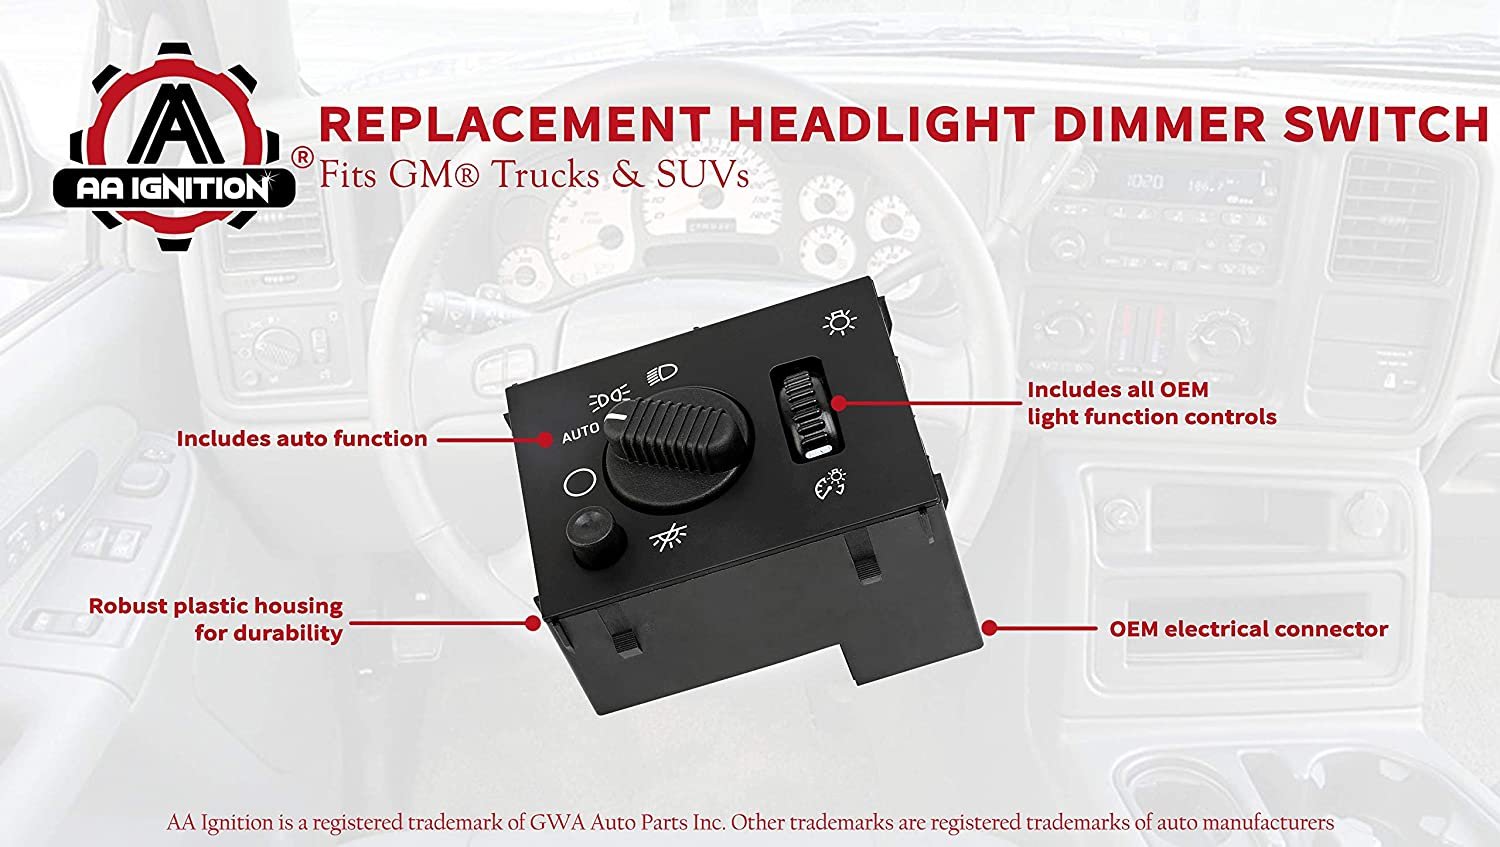 Headlight Dimmer Dome Lamp Switch - Chevy GMC Hummer - Silverado Tahoe Yukon - Replaces D1595G 19381535 -  Free Shipping